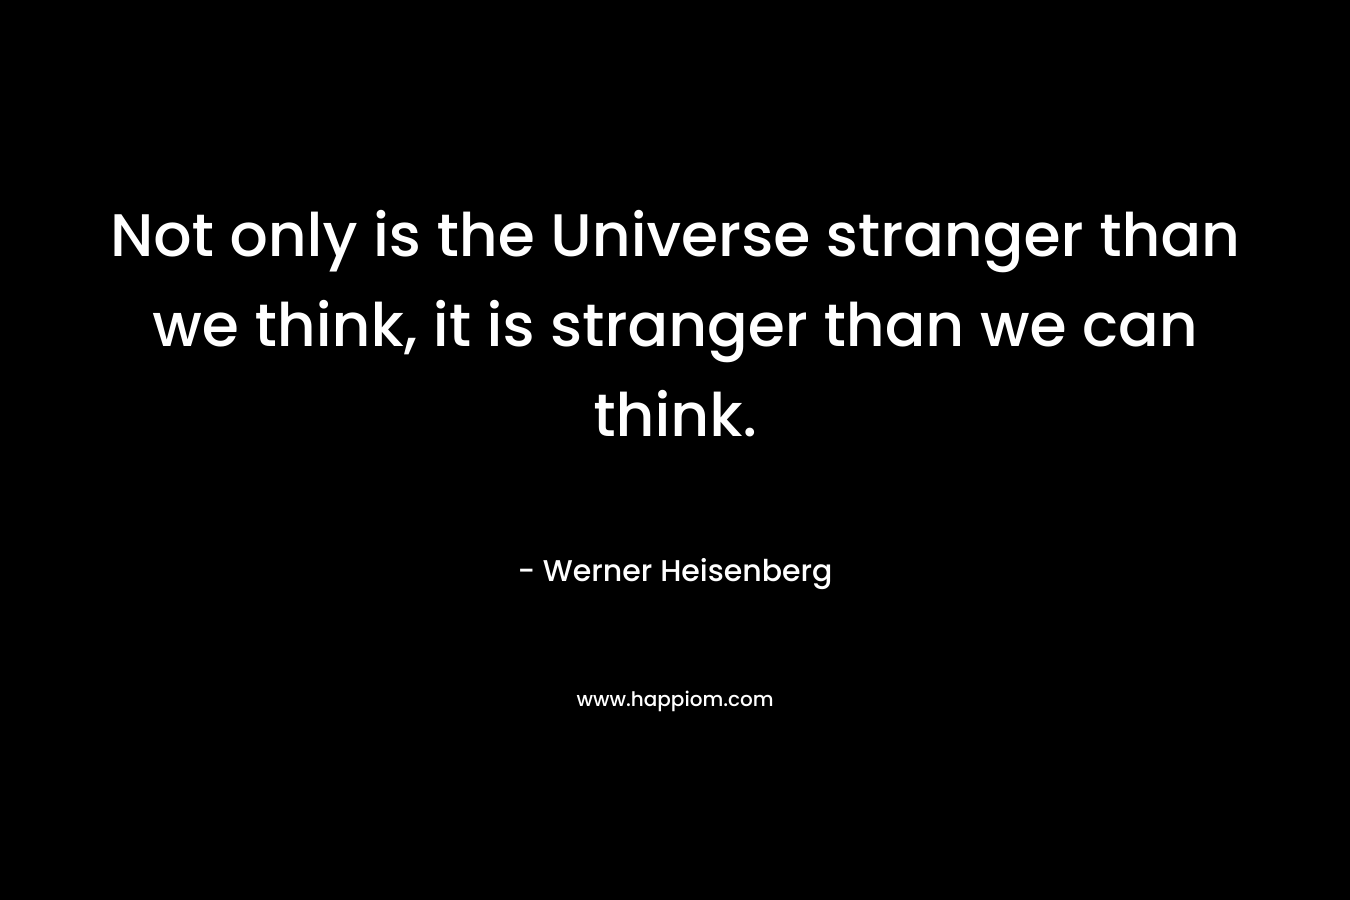 Not only is the Universe stranger than we think, it is stranger than we can think.